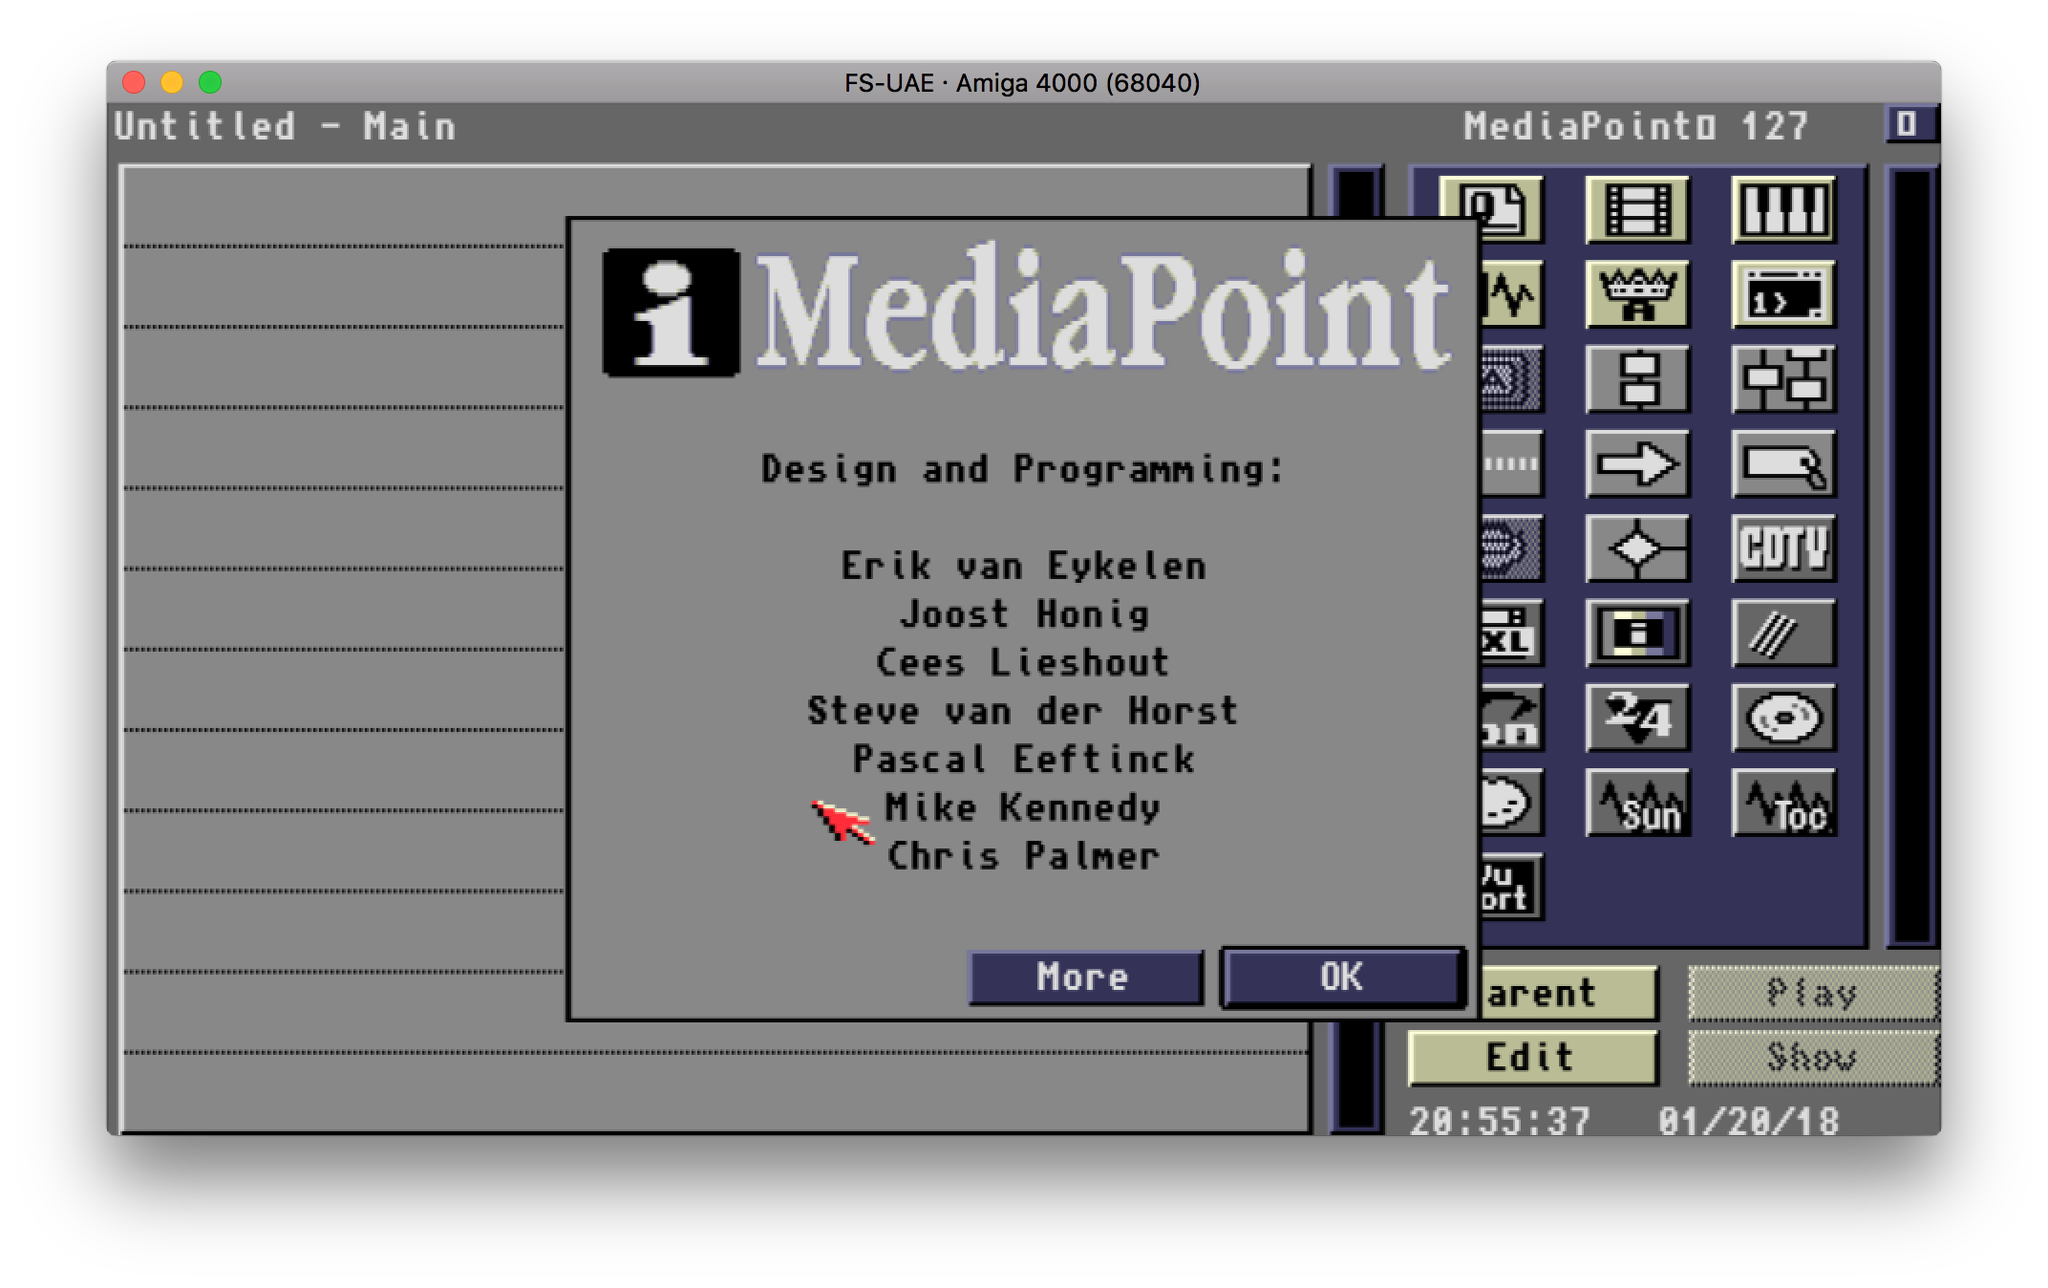 MediaPoint